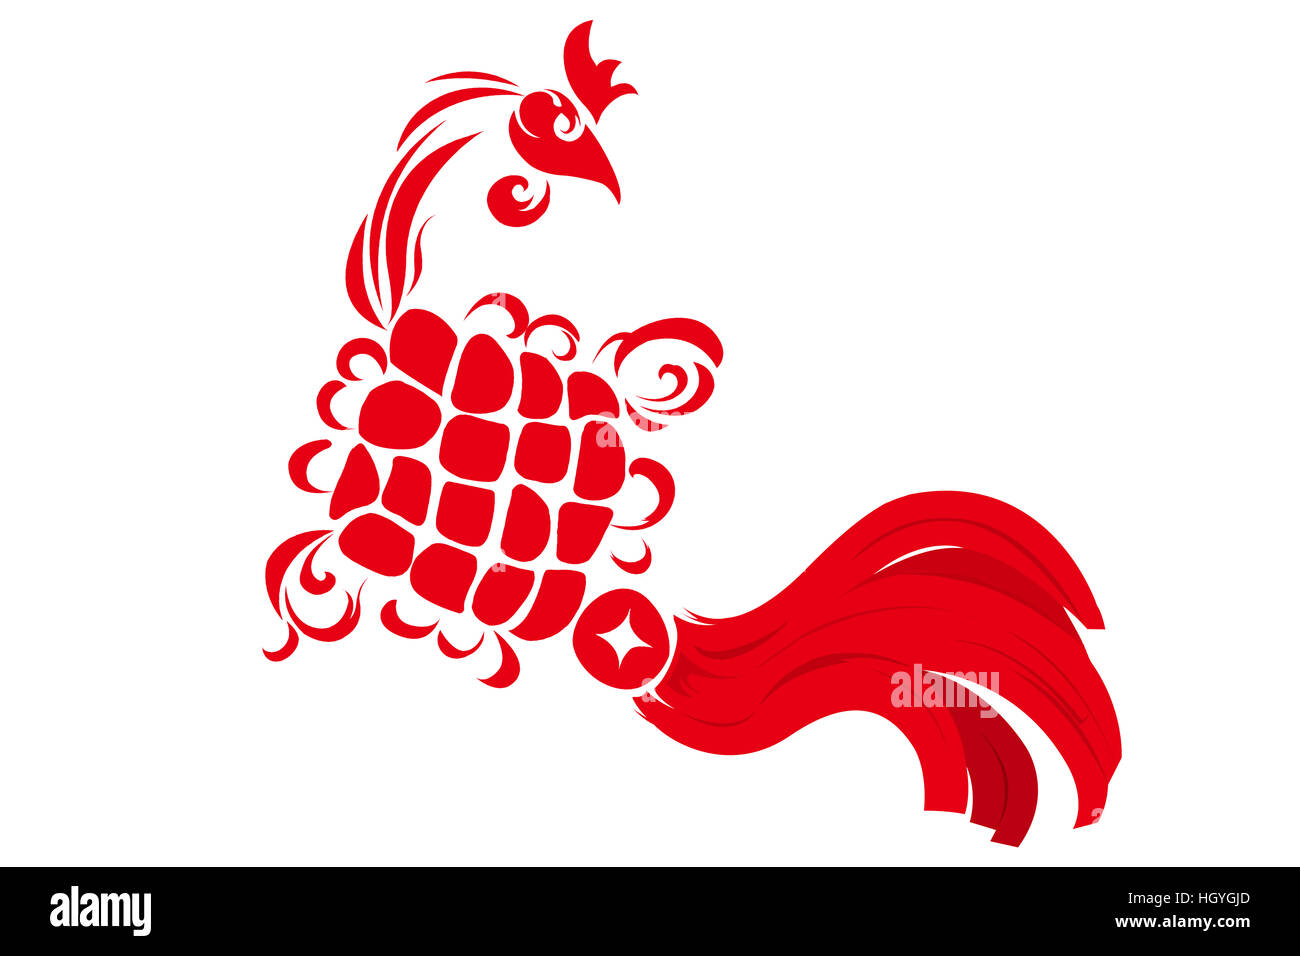 Set of circles red black white 2017 - Chinese Year of the Rooster  Hieroglyphs. Collection of Hand drawn circle stamps with roosters symbols.  Chinese calligraphy rooster zodiac signs., Stock vector